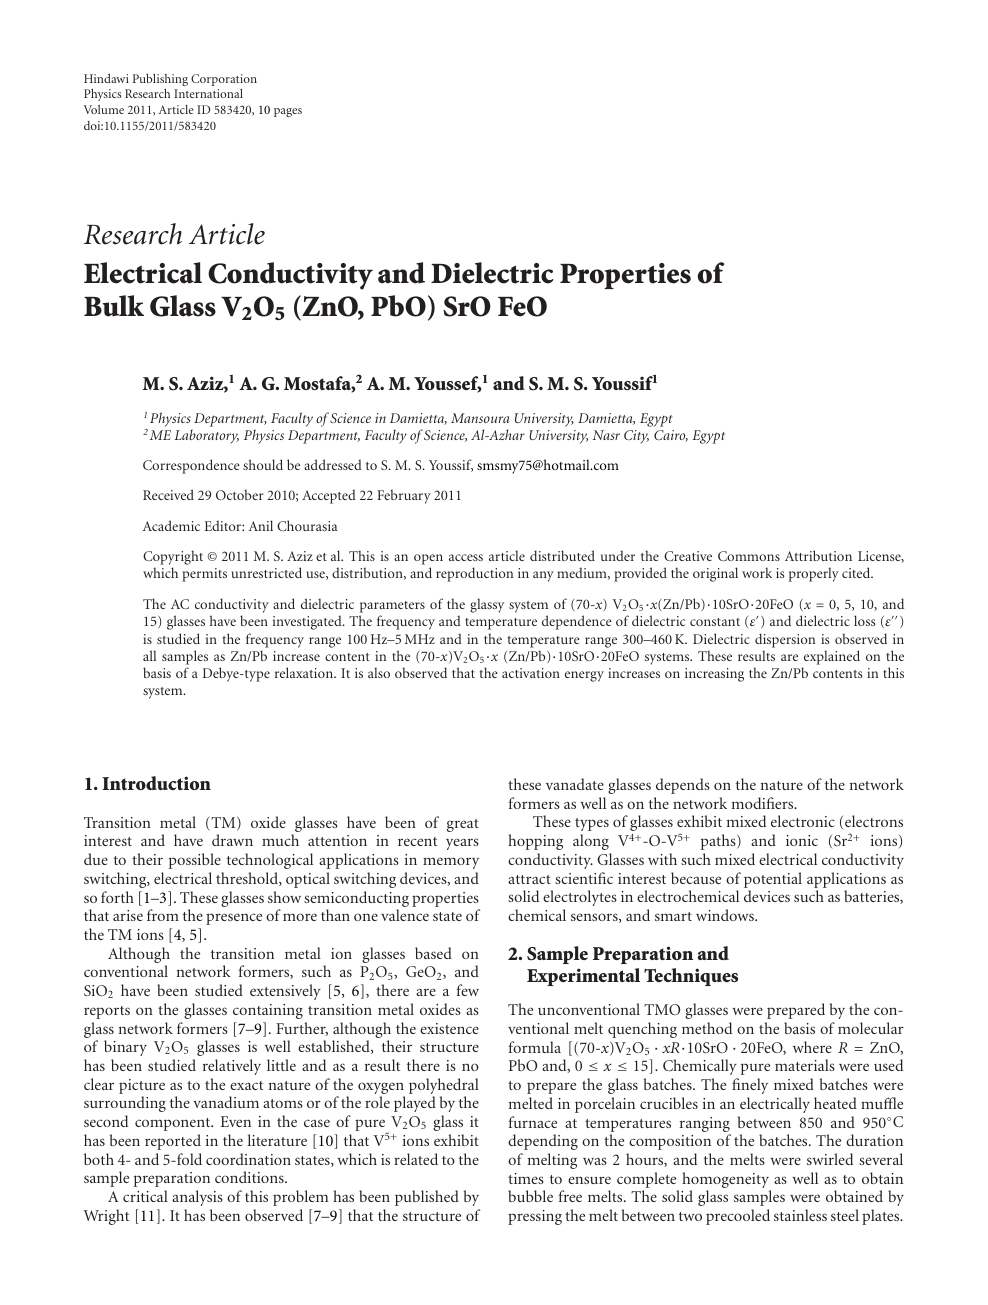 Electrical Conductivity And Dielectric Properties Of Bulk Glass V 2 O 5 Zno Pbo Sro Feo Topic Of Research Paper In Physical Sciences Download Scholarly Article Pdf And Read For Free